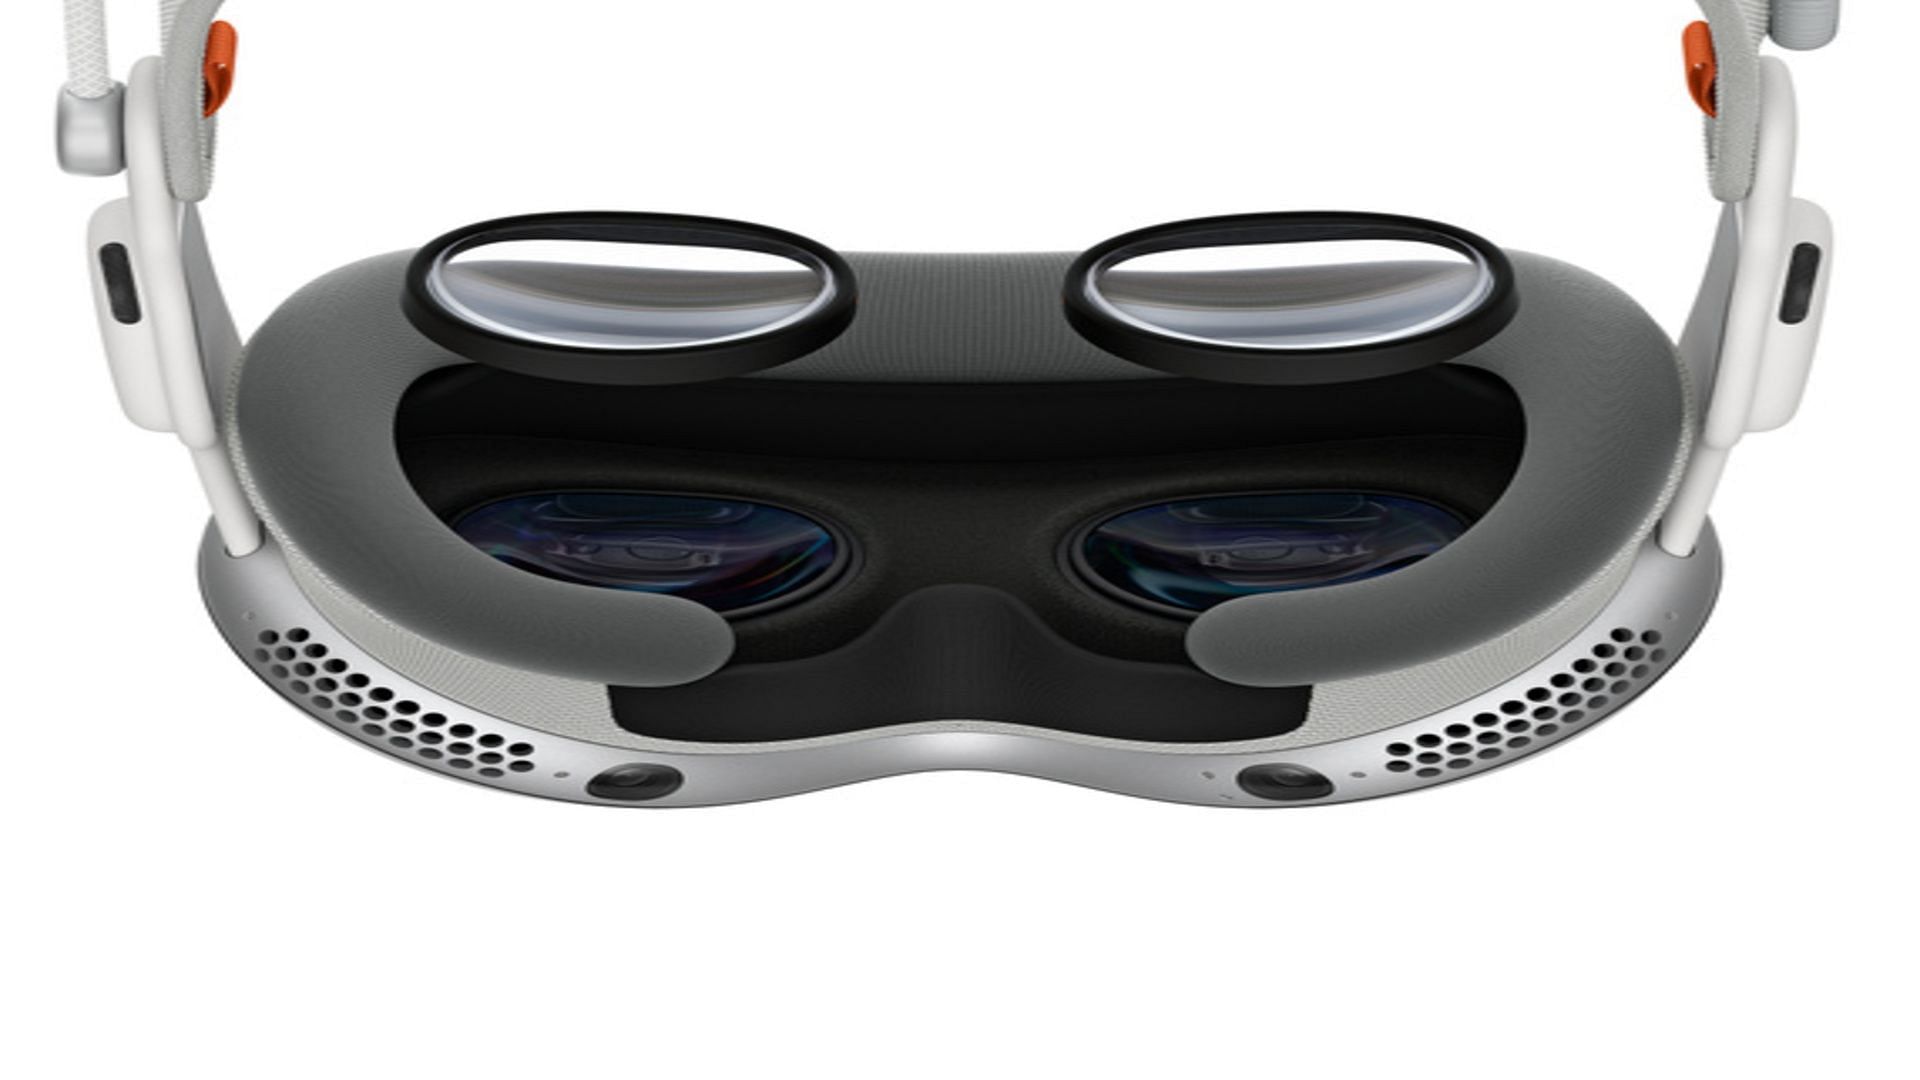 Zeiss Optical Inserts (Image via Apple)